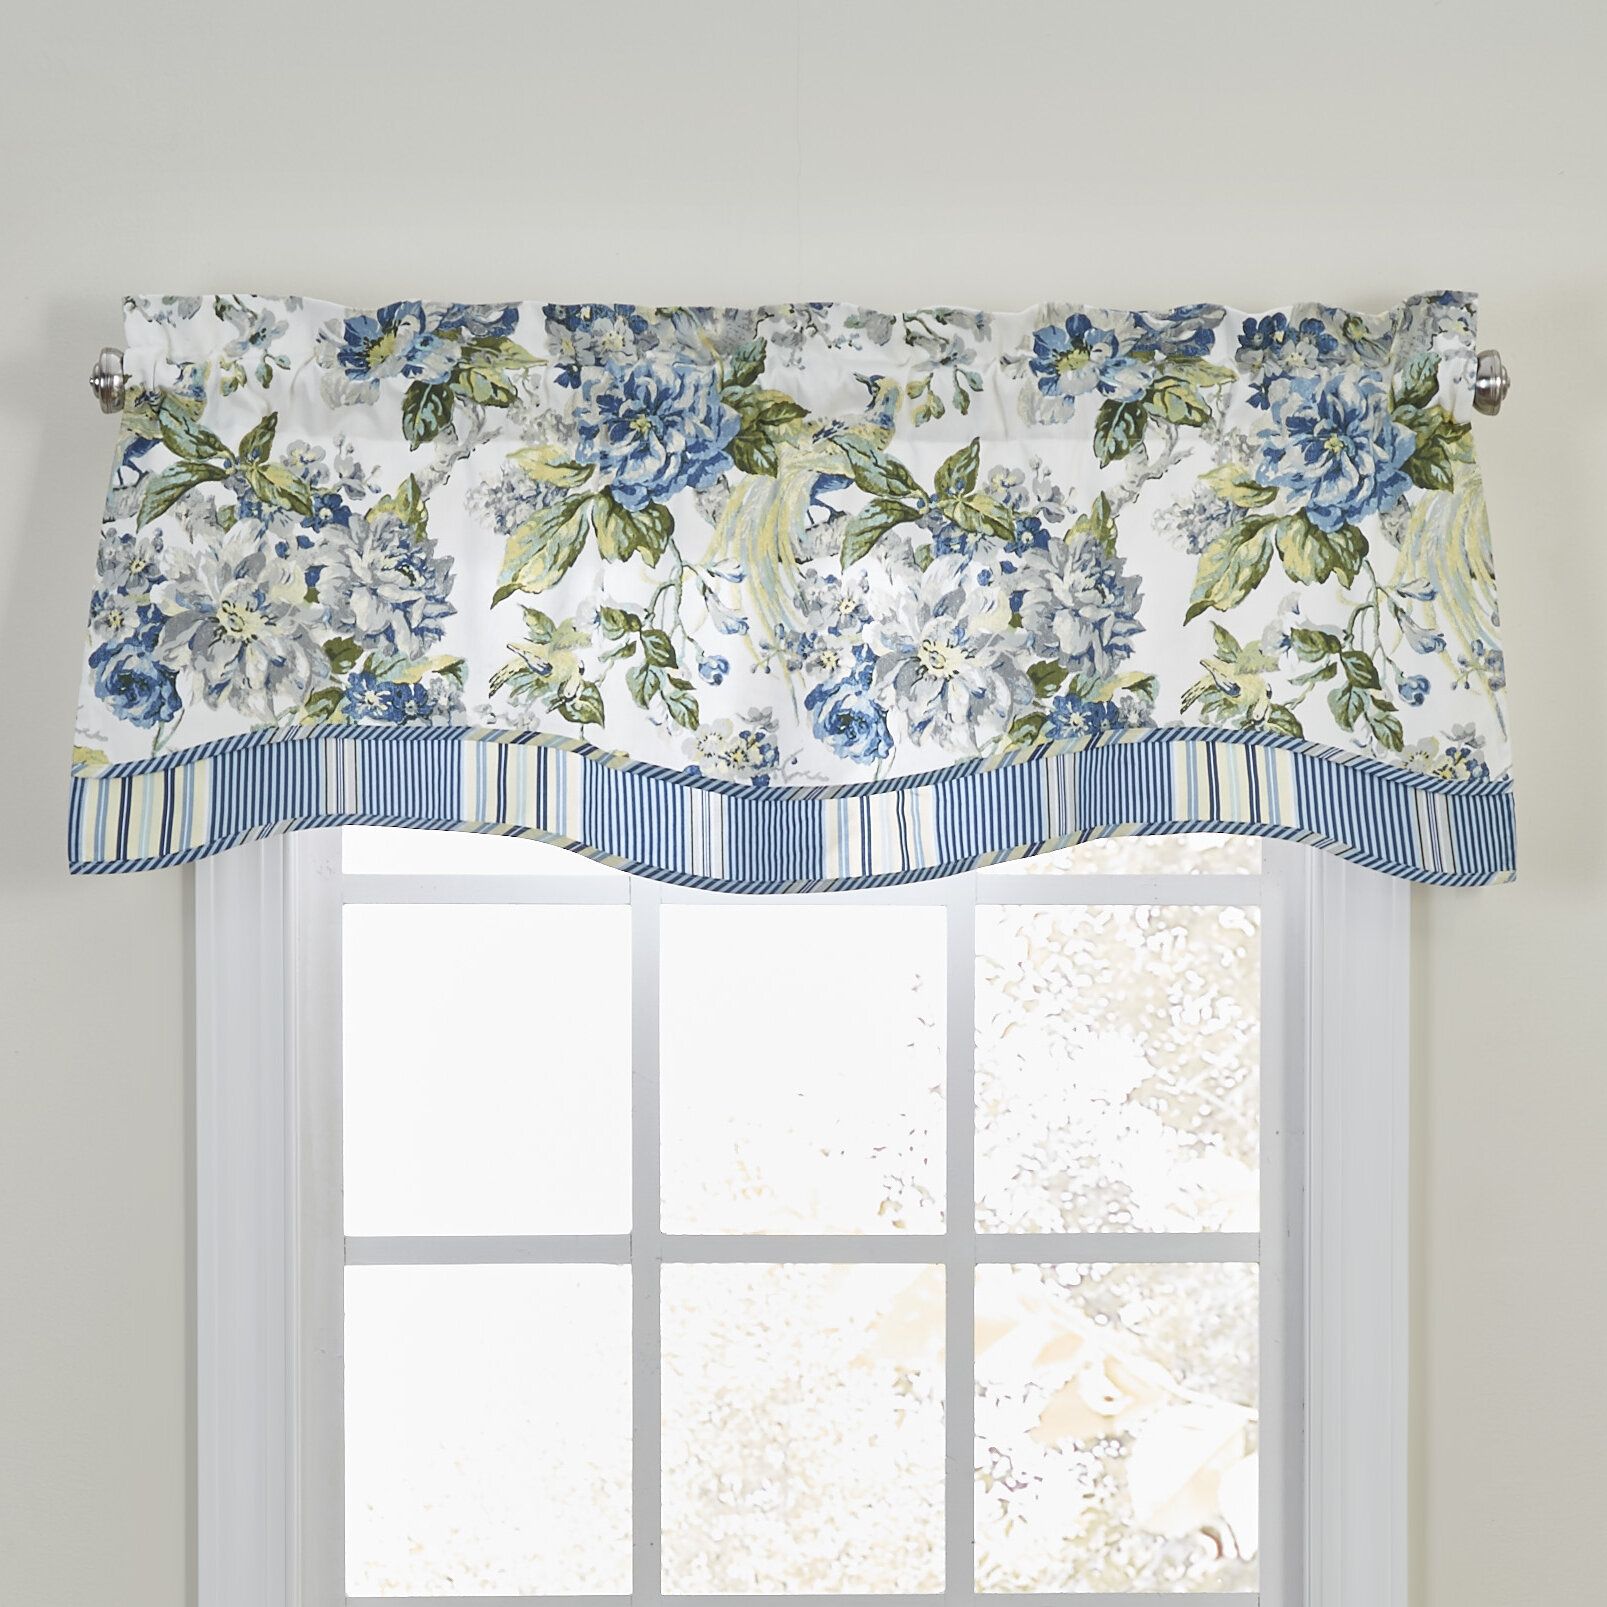 Floral Engagement Curtain Valance Throughout Floral Pattern Window Valances (View 11 of 20)